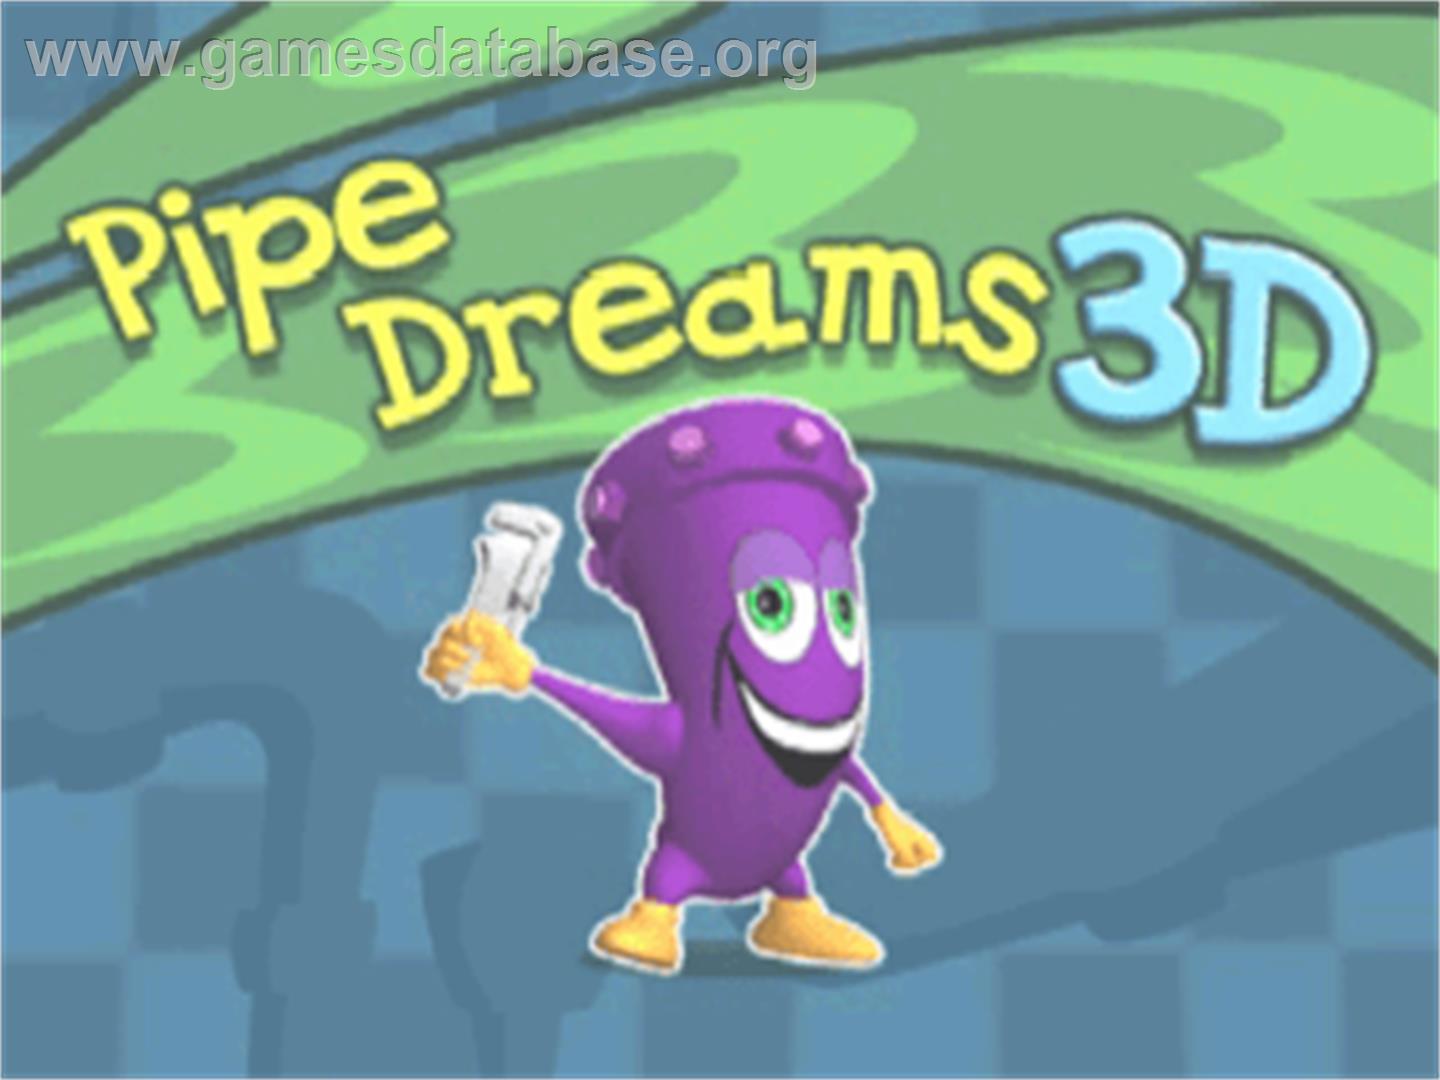 Pipe Dreams 3D - Sony Playstation - Artwork - Title Screen